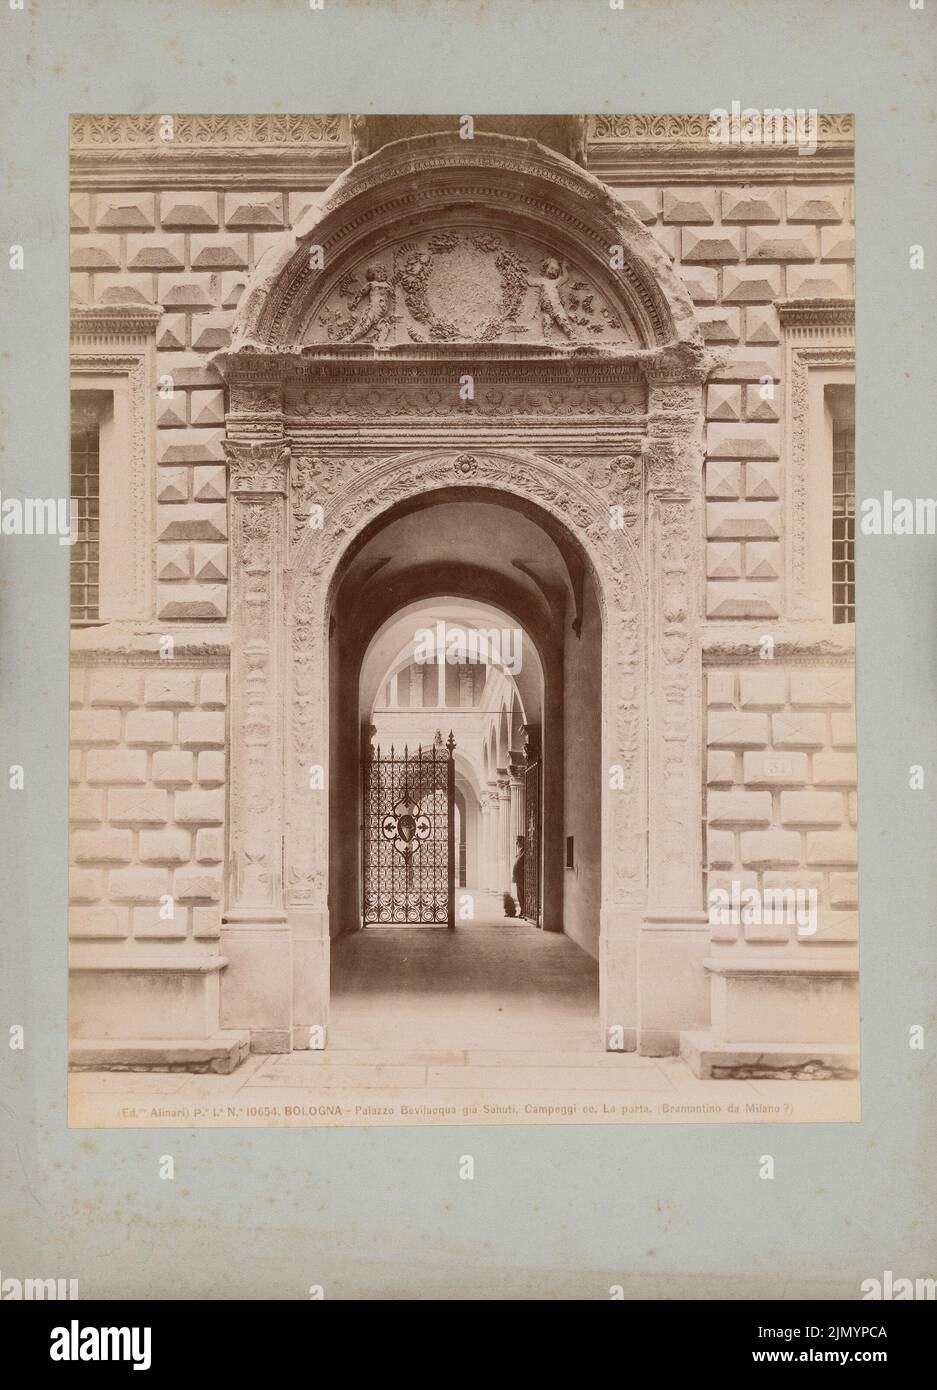 Bramantino (1465-1530), Palazzo Bevilacqua, Bologna (without dat.): View portal with a view of the courtyard. Photo on cardboard, 32.7 x 23.6 cm (including scan edges) Stock Photo